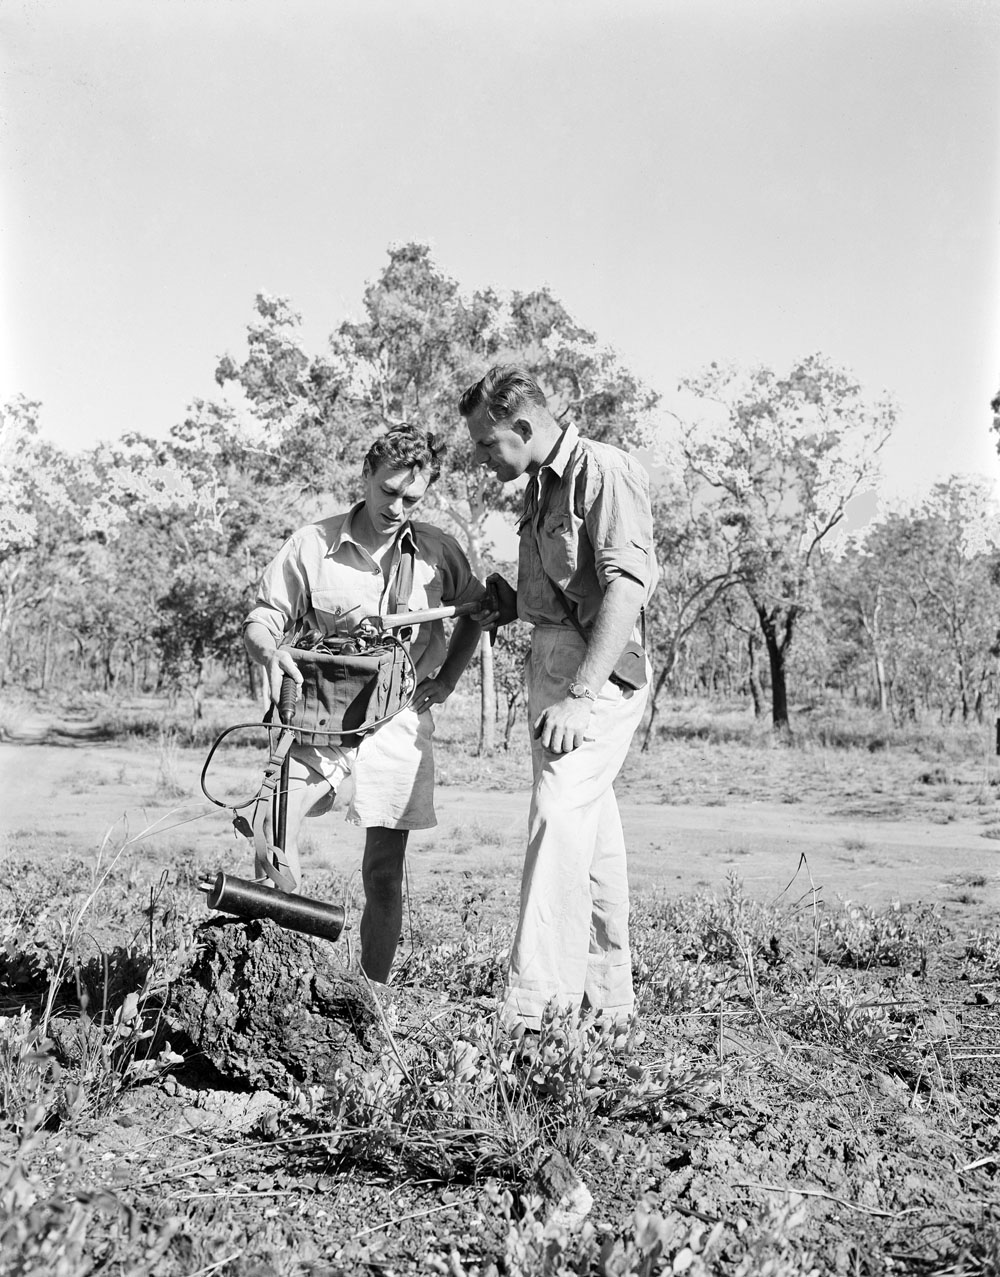 Geophysicist Don Dyson (left) and Geologist Hector Ward use a Geiger counter to examine a mineral outcrop in a belt of uranium bear (1955) National Archives of Australia: A1200, L19458.